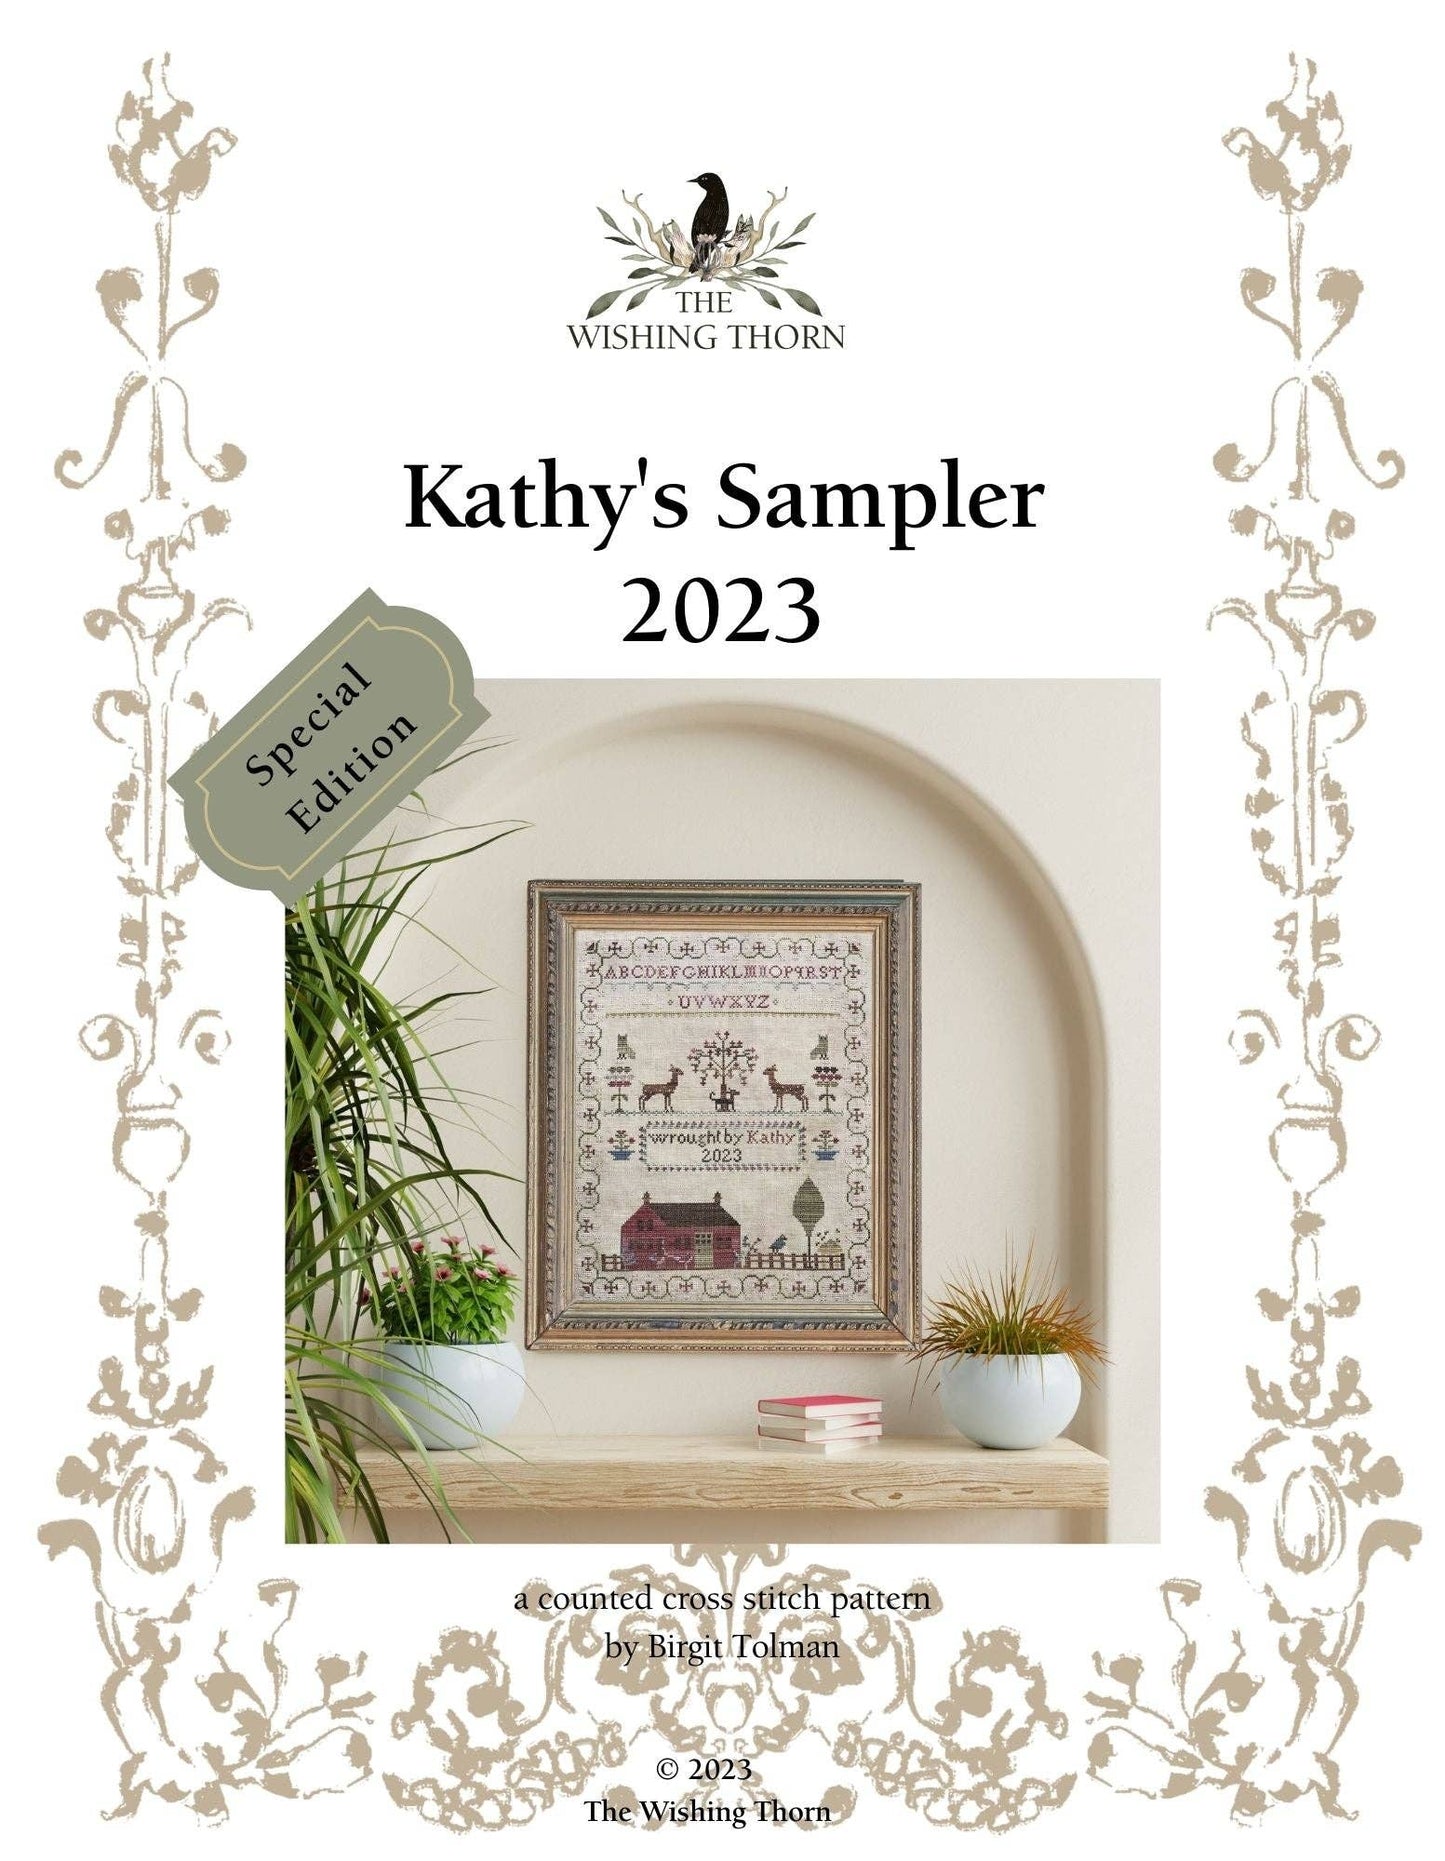 Kathy's Sampler 2023 Paper Chart | The Wishing Thorn